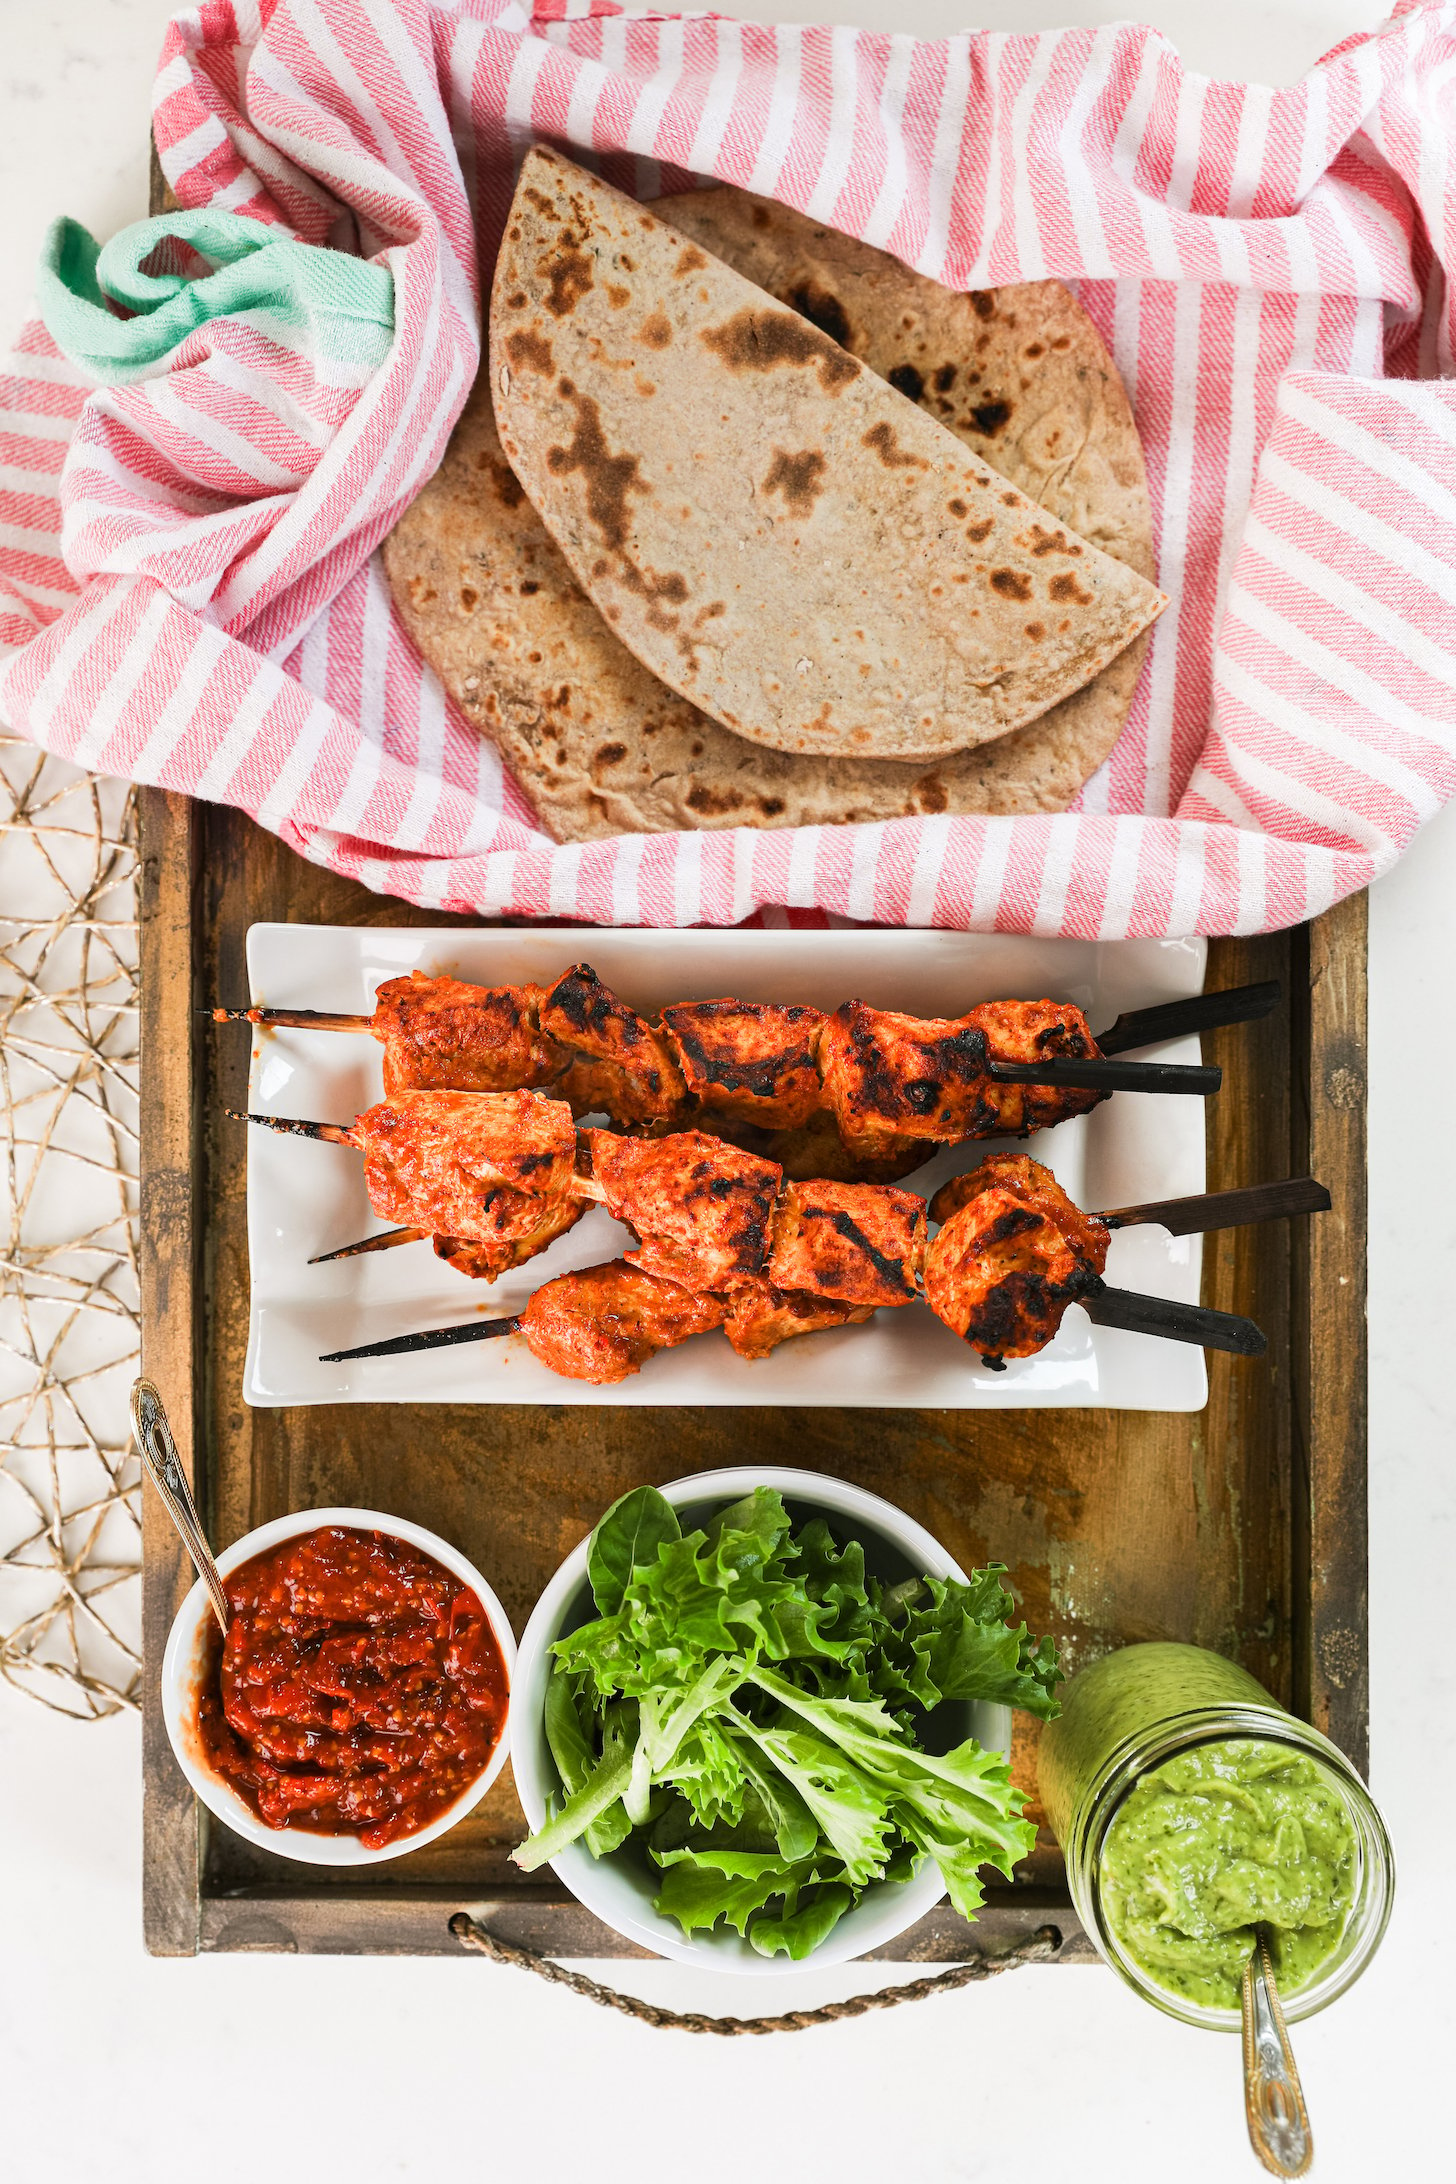 A selection of food ingredients like grilled tandoori chicken skewers, greens, sauces and roti.